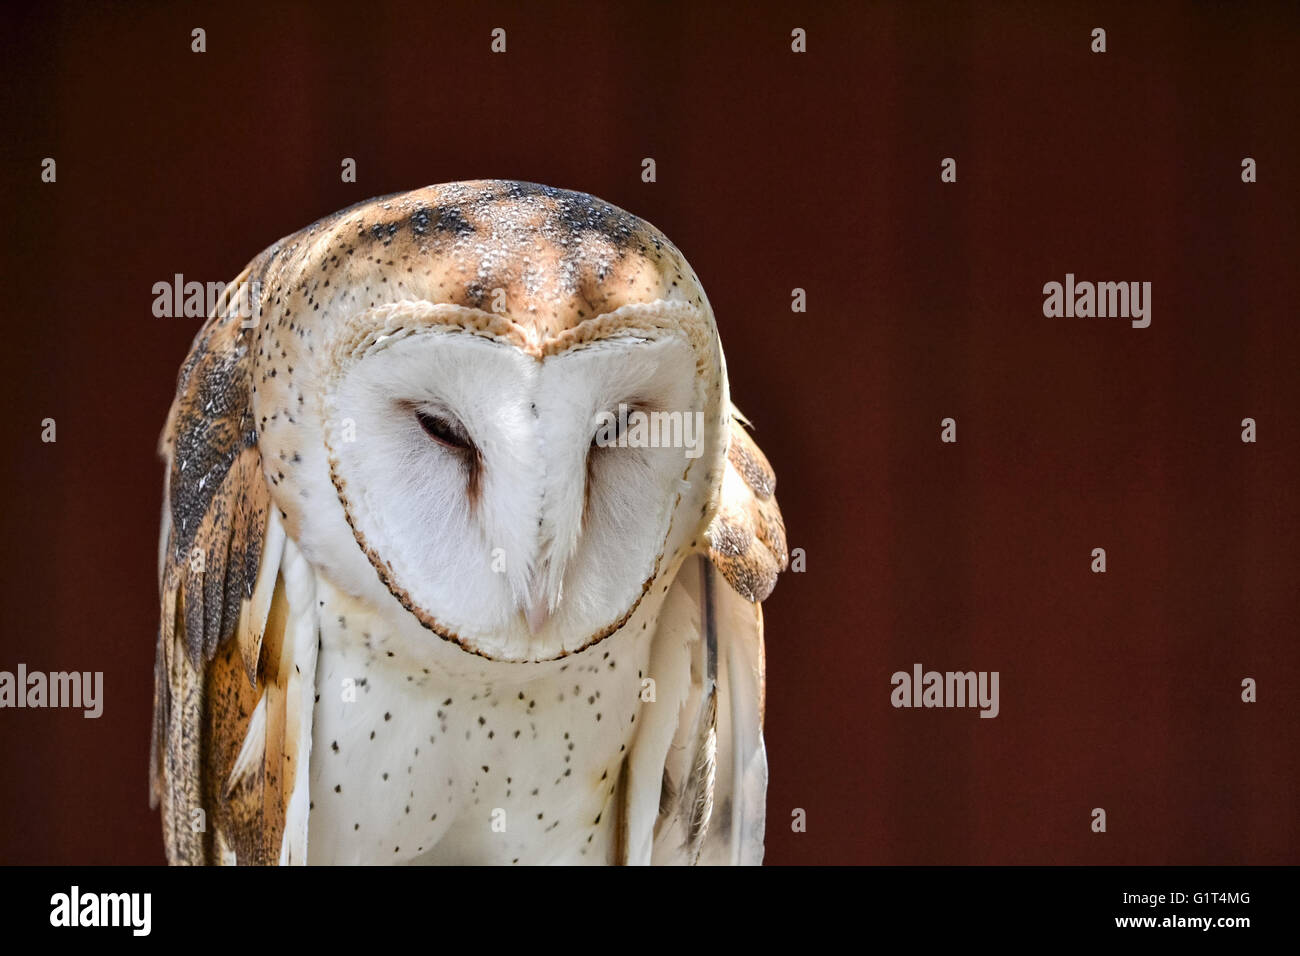 Close up on the face of a barn owl, Tyto alba, against red barn background Stock Photo